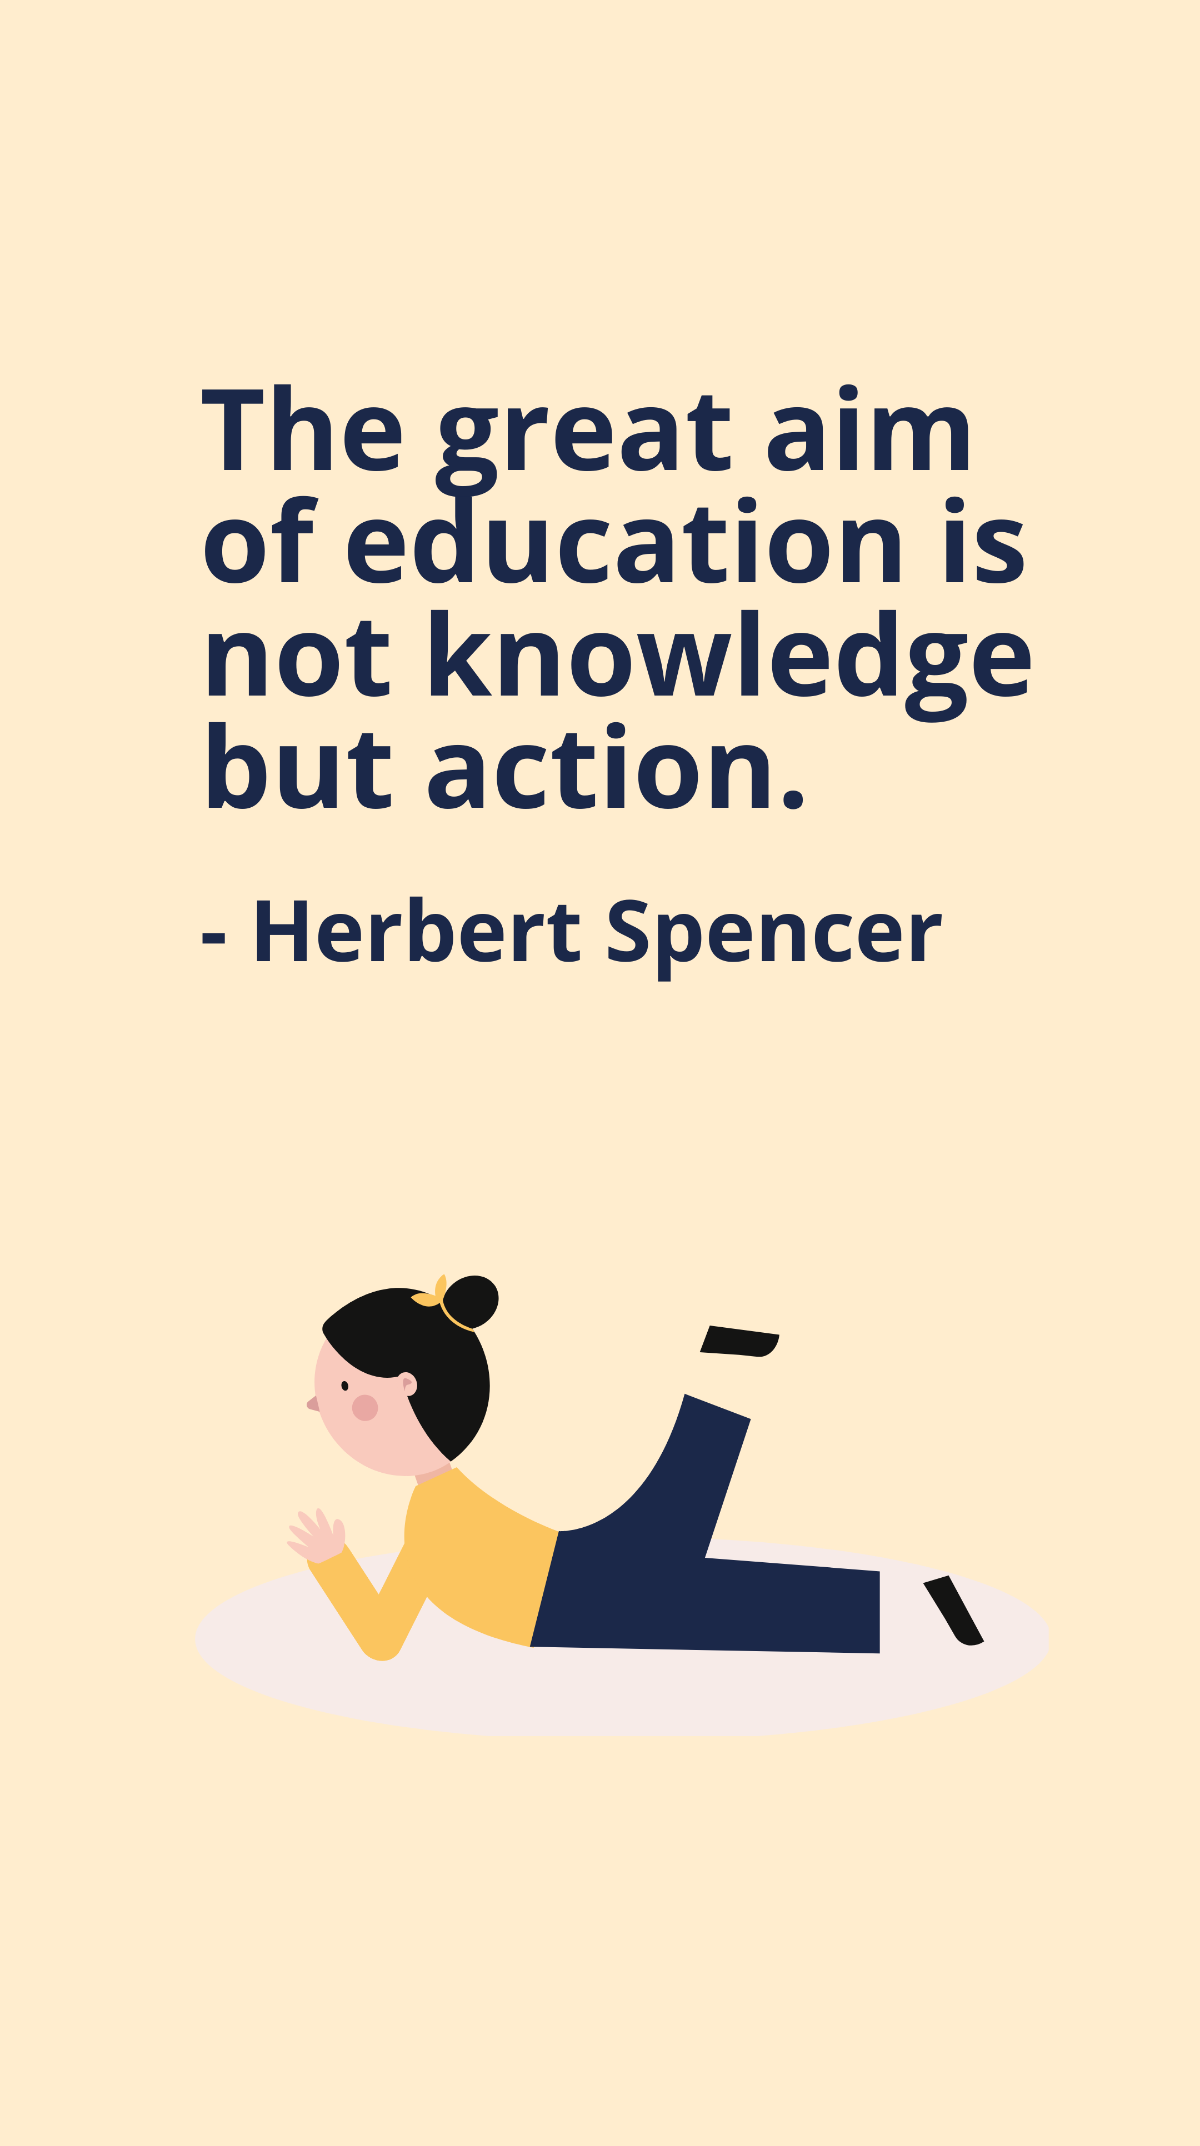 Herbert Spencer - The great aim of education is not knowledge but action.